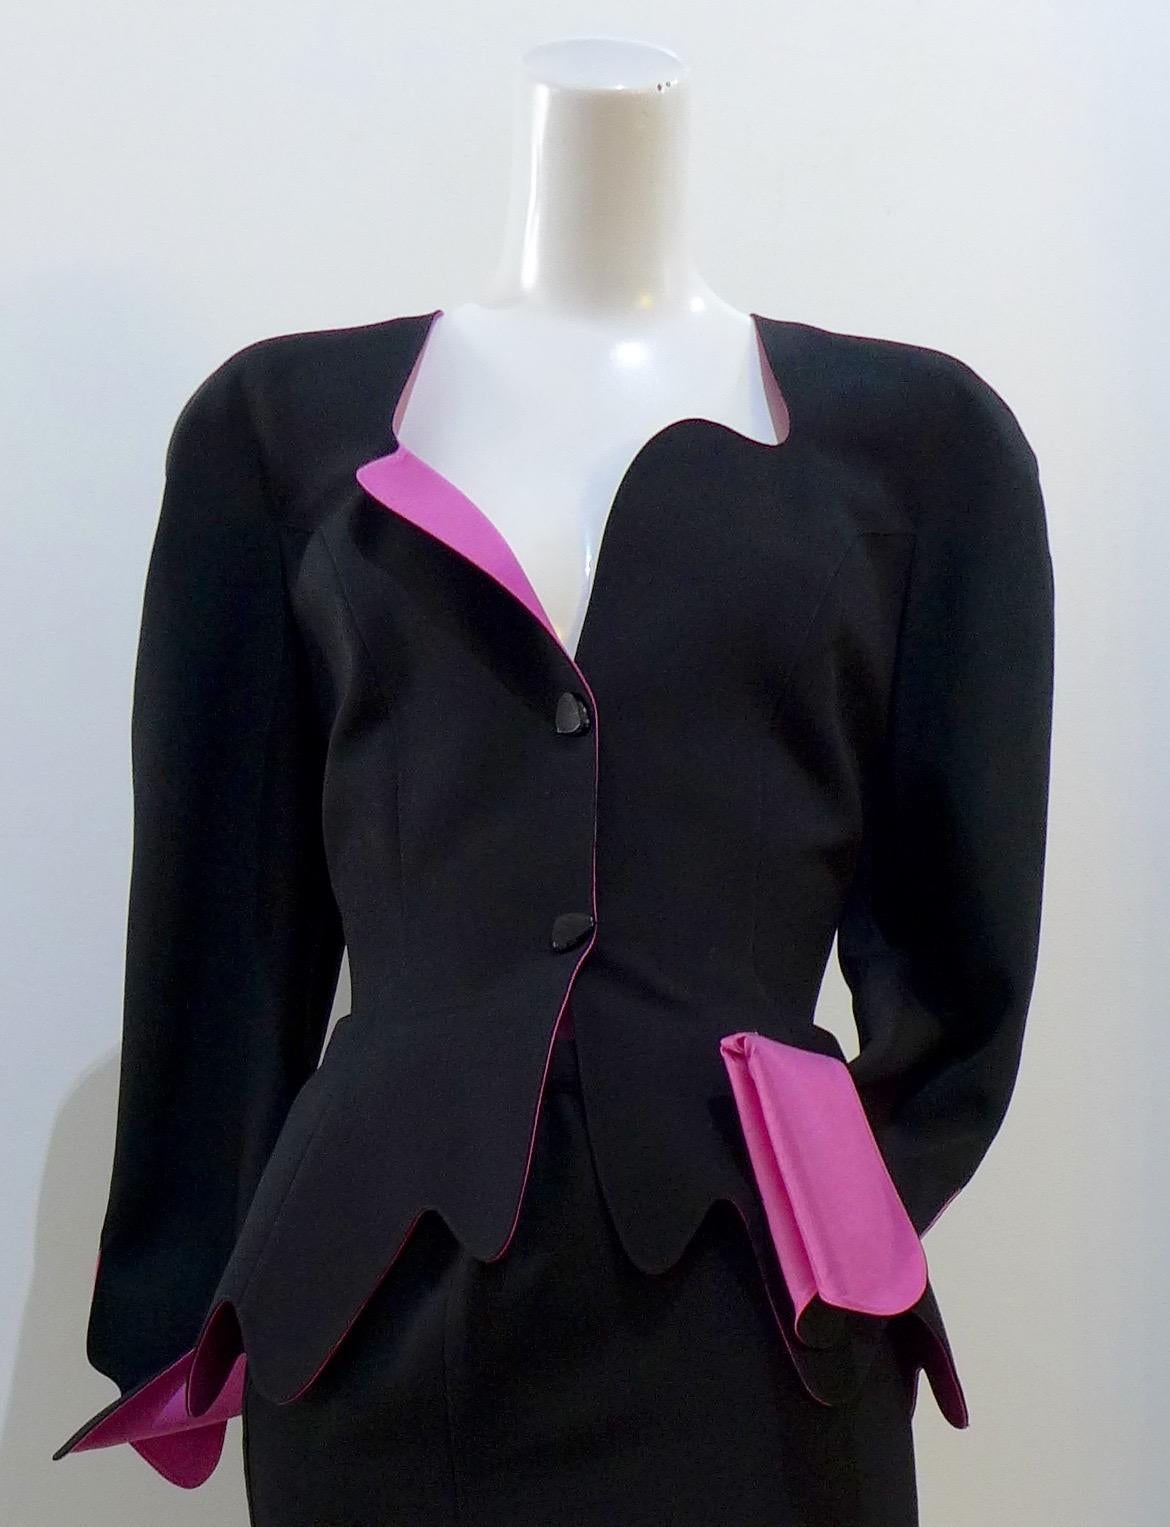 This THIERRY MUGLER skirt suit is composed of a black wool fabric with bright pink lining and cuff. Features a classic Mugler silhouette with nipped waist and curved bust-line to neckline design. The jacket has front snap closures, rounded